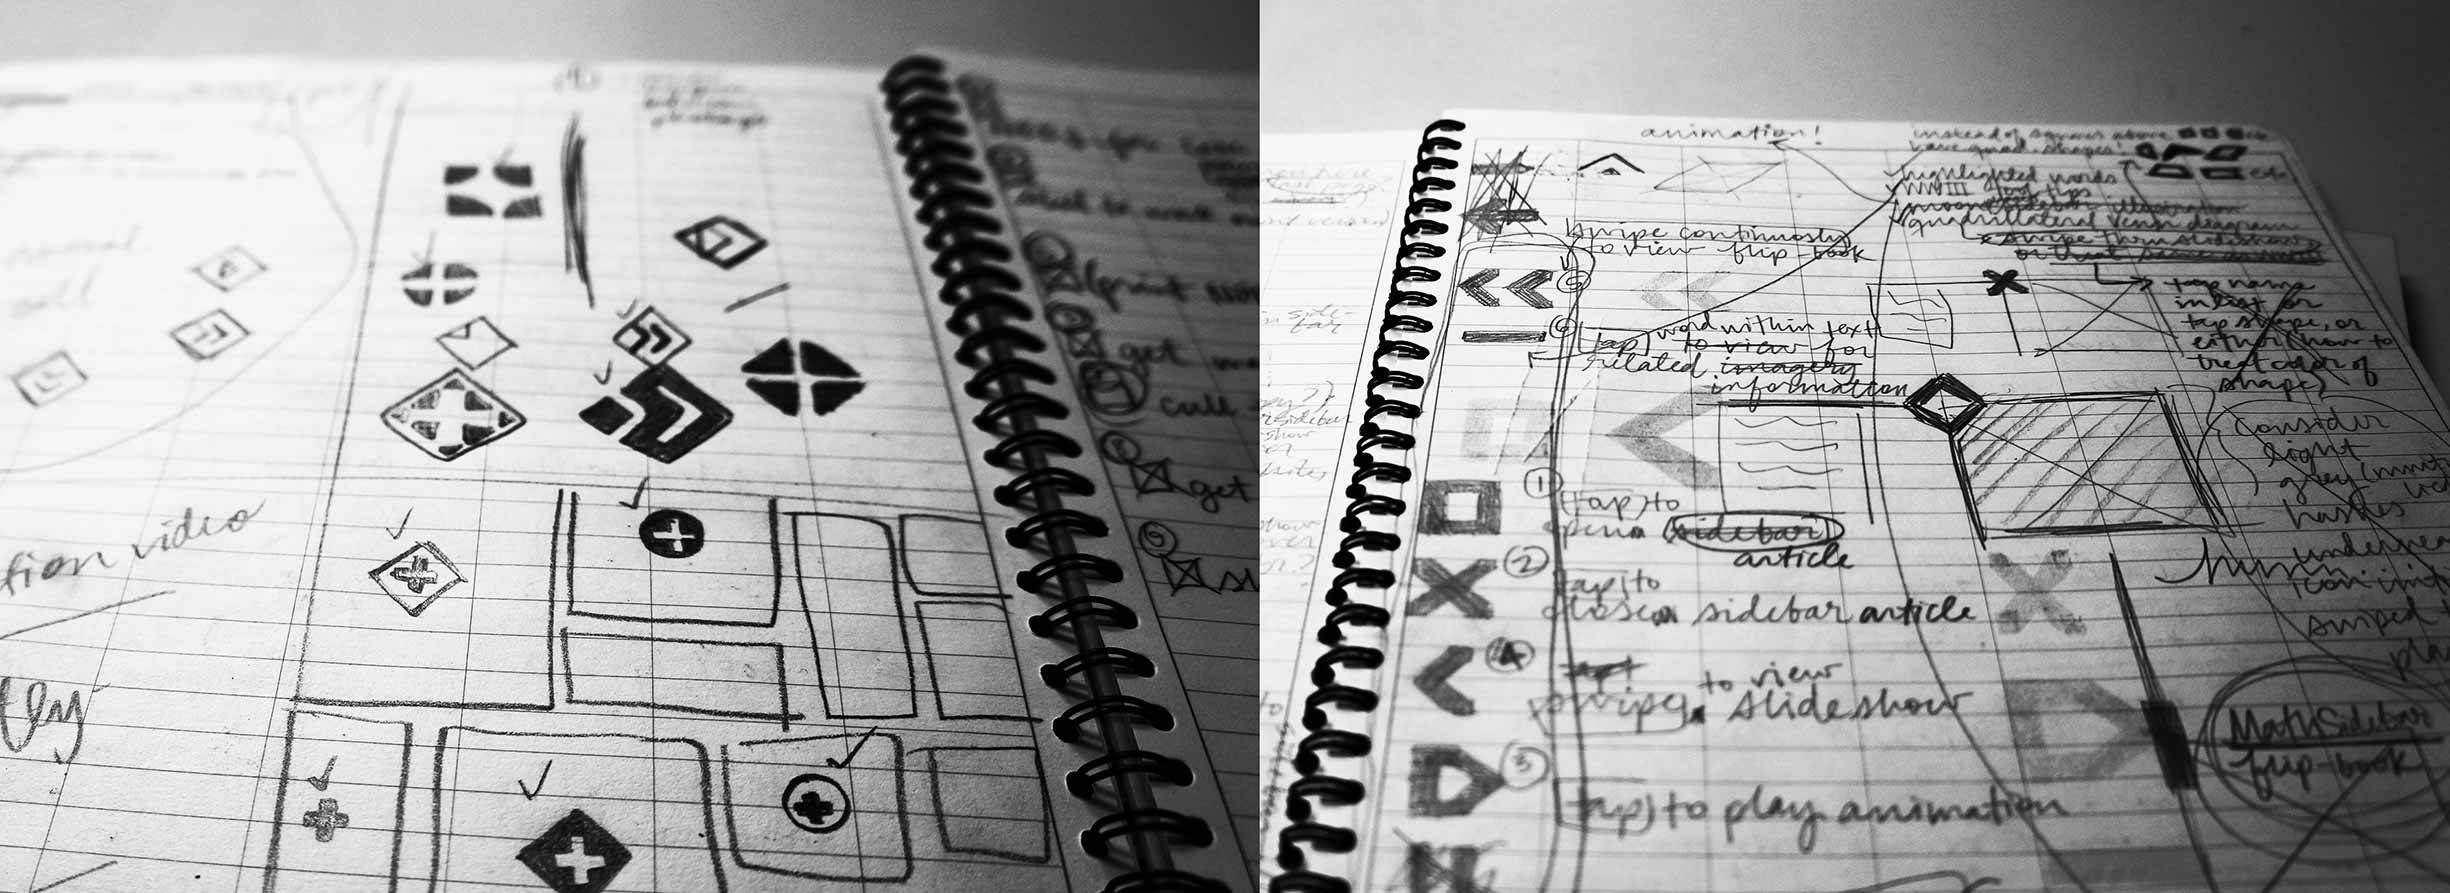 A notebook spread features sketches exploring gesture icon concepts.